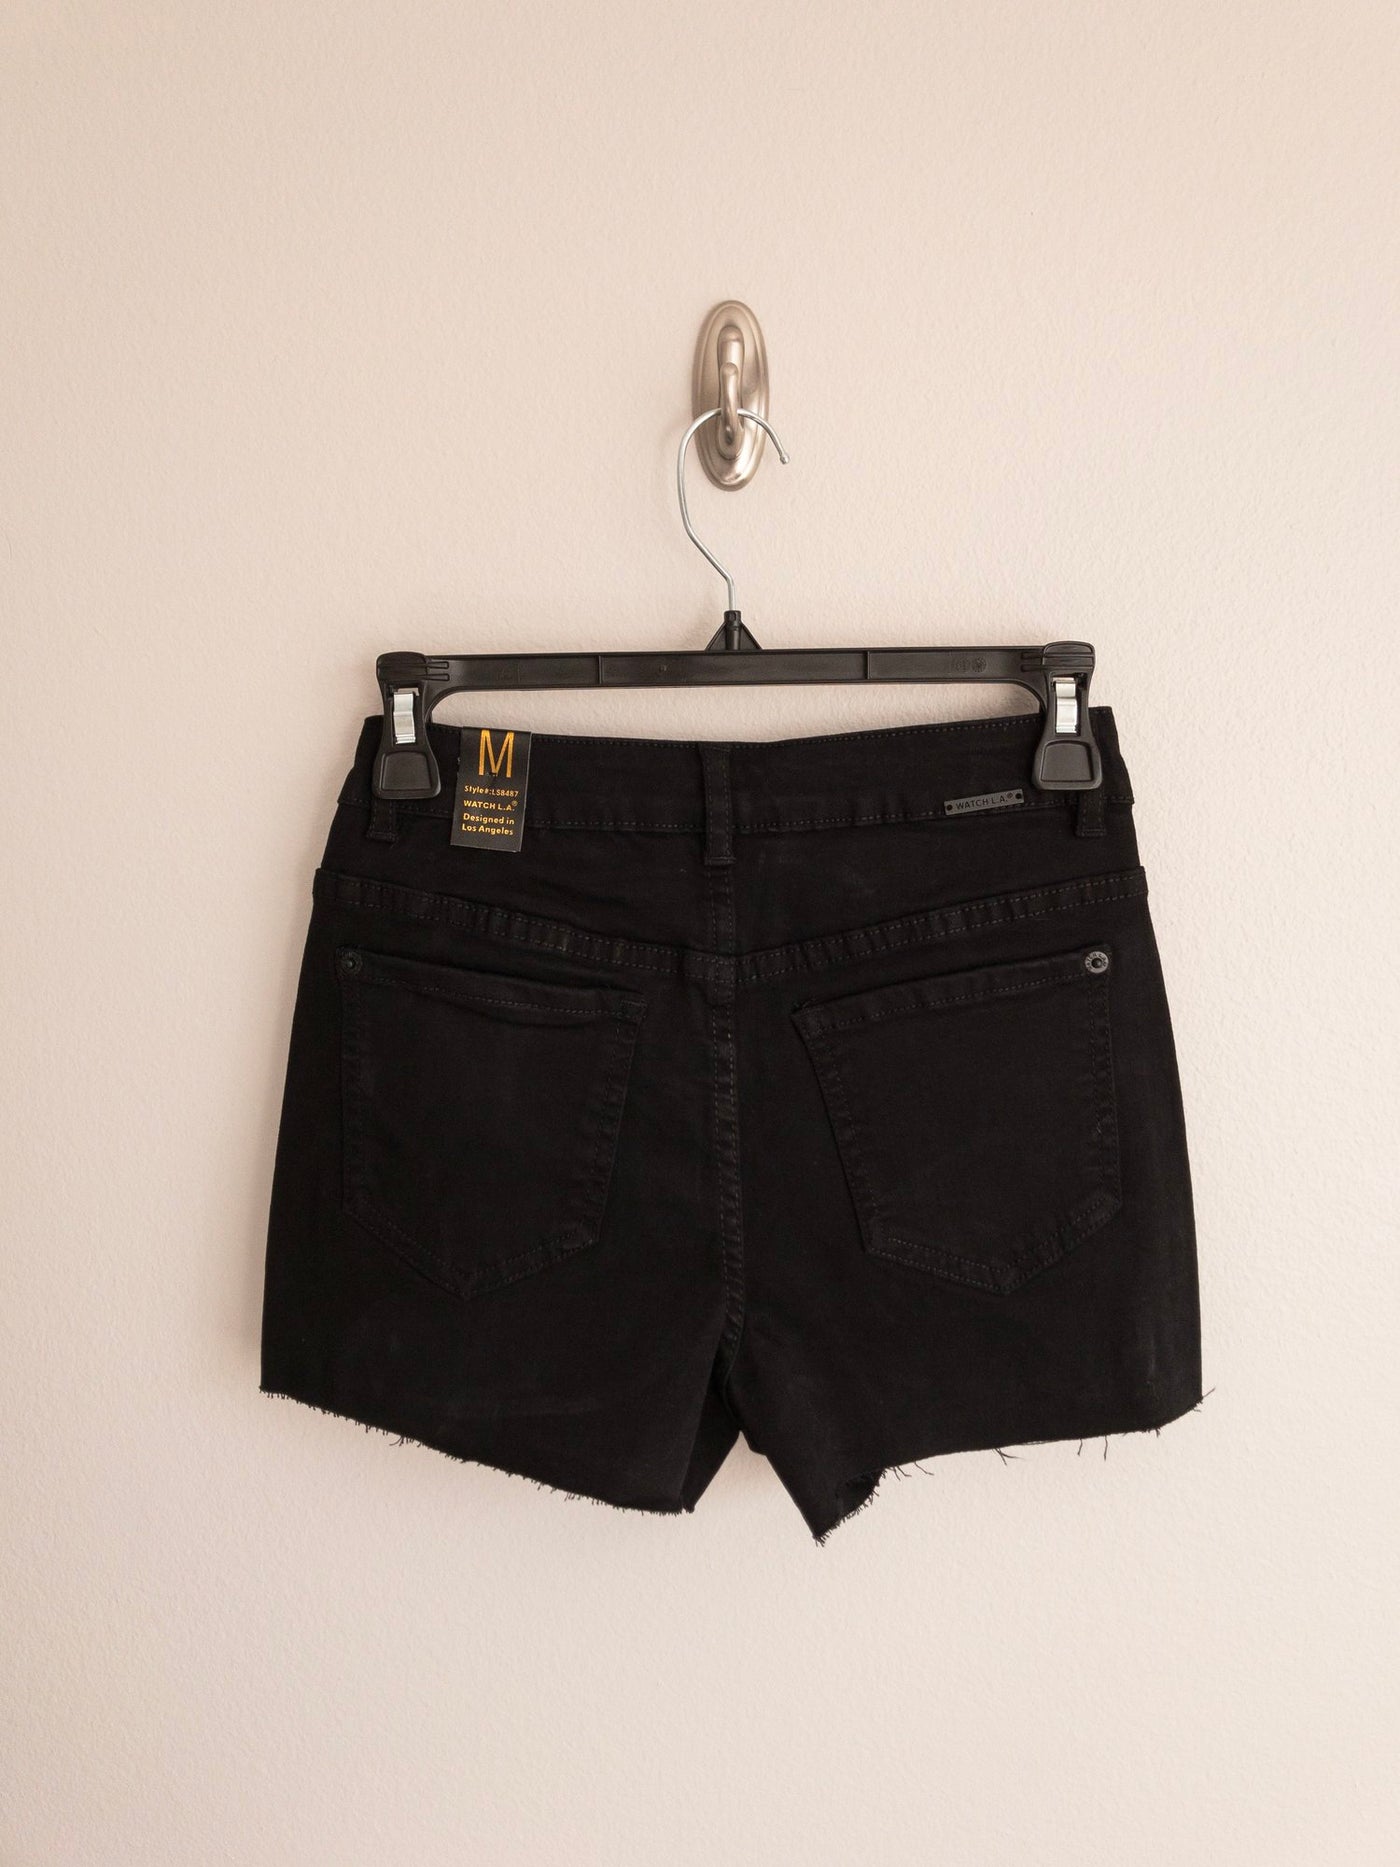 Staci Denim Shorts - Corinne an Affordable Women's Clothing Boutique in the US USA